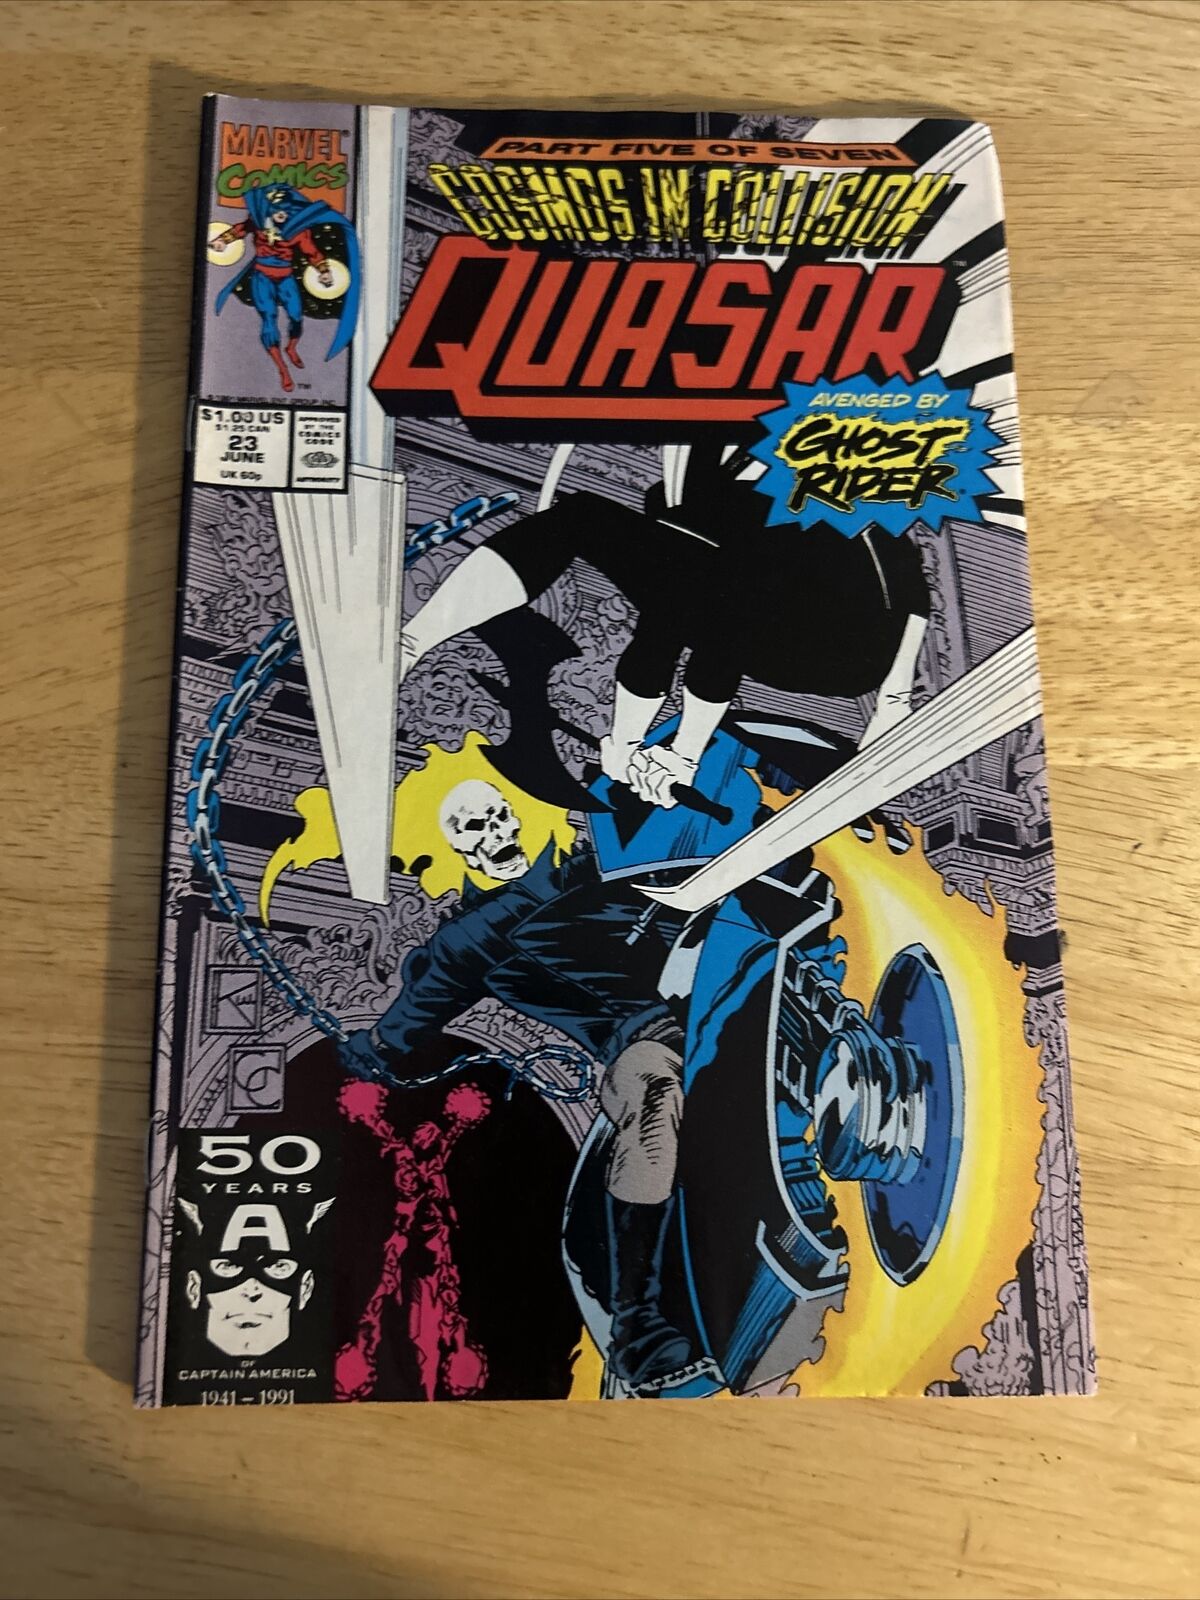 Quasar Avenged By Ghost Rider Marvel Comic, Issue 23